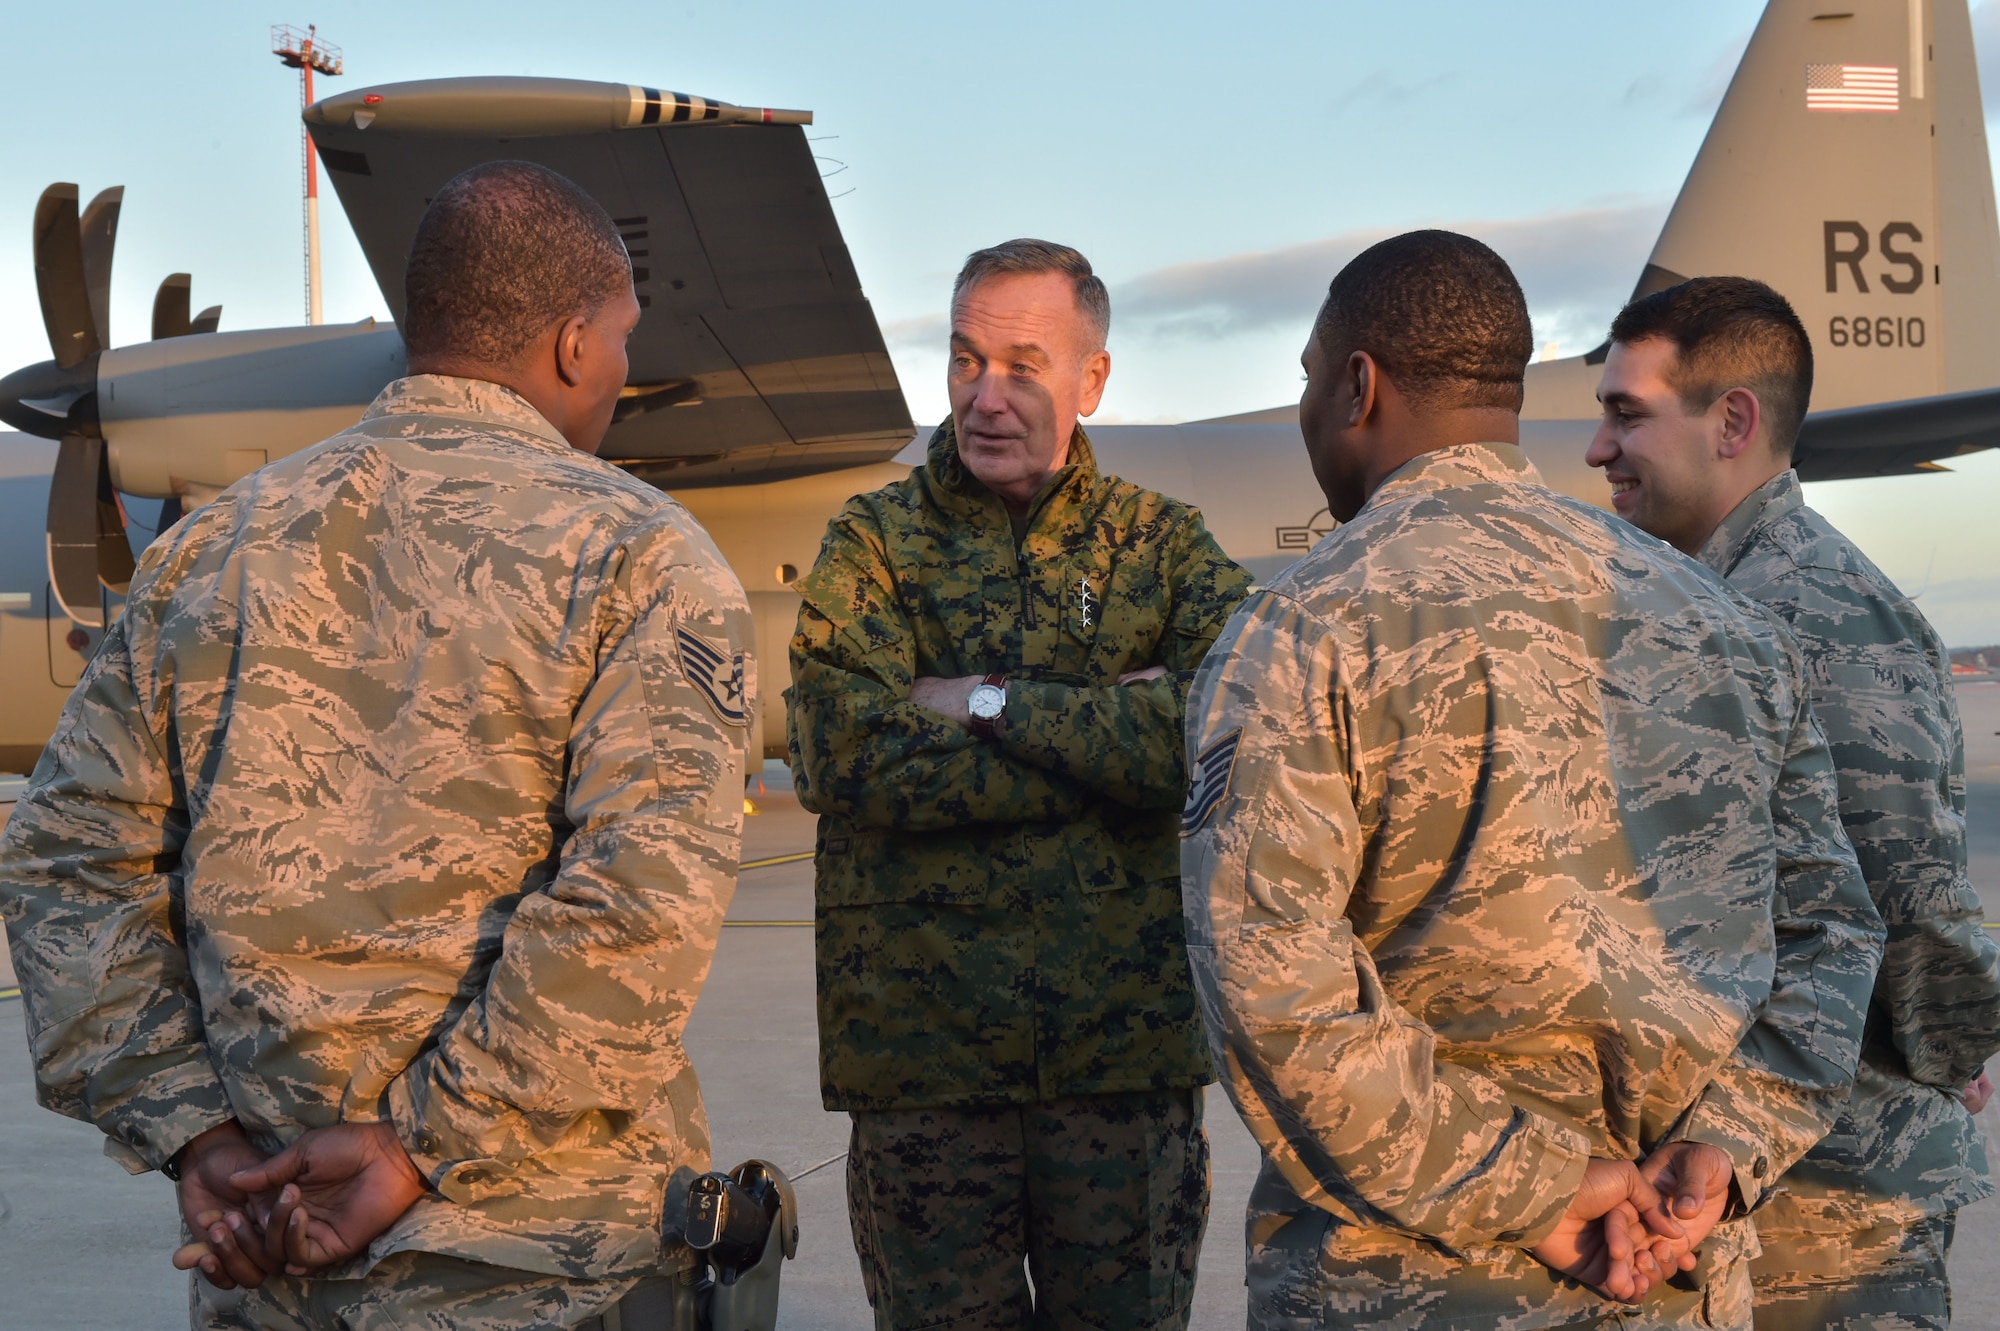 U.S. Marine Corps Gen. Joseph F. Dunford Jr., chairman of the Joint Chiefs of Staff, visits Airmen from the 435th Air Ground Operations Wing during the 2015 USO Holiday Troop Tour, Dec. 9, 2015, at Ramstein Air Base, Germany. Ramstein was the final stop on the tour, after places such as Bahrain, and Djibouti. (U.S. Air Force photo/Staff Sgt. Leslie Keopka)